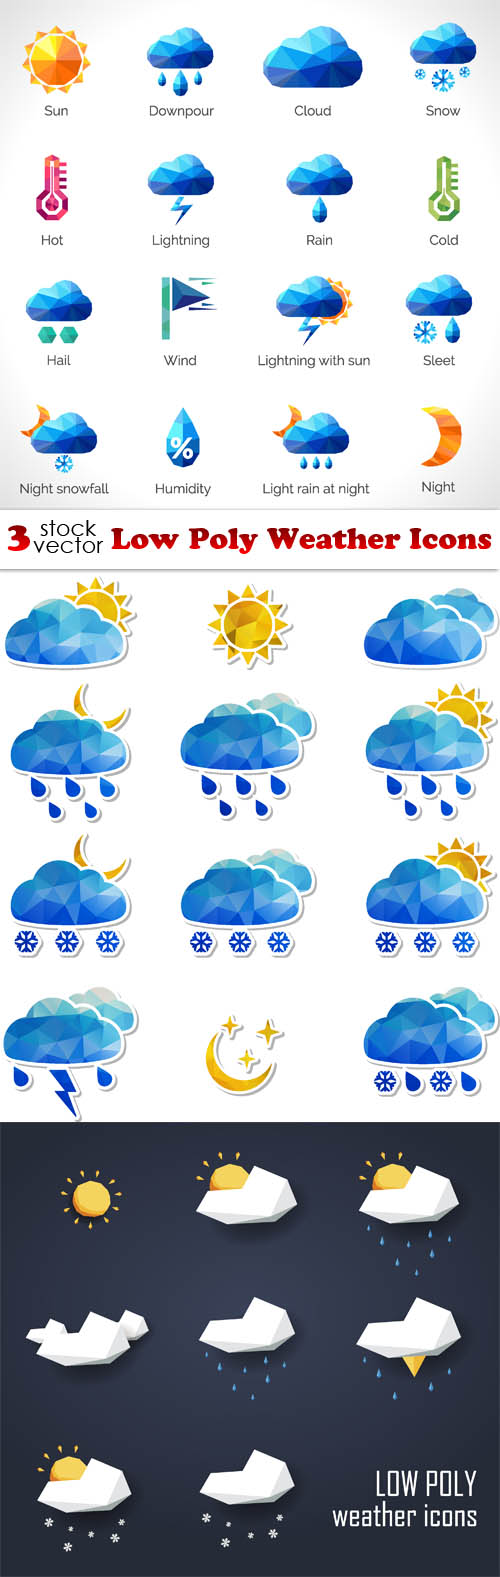 Vectors - Low Poly Weather Icons